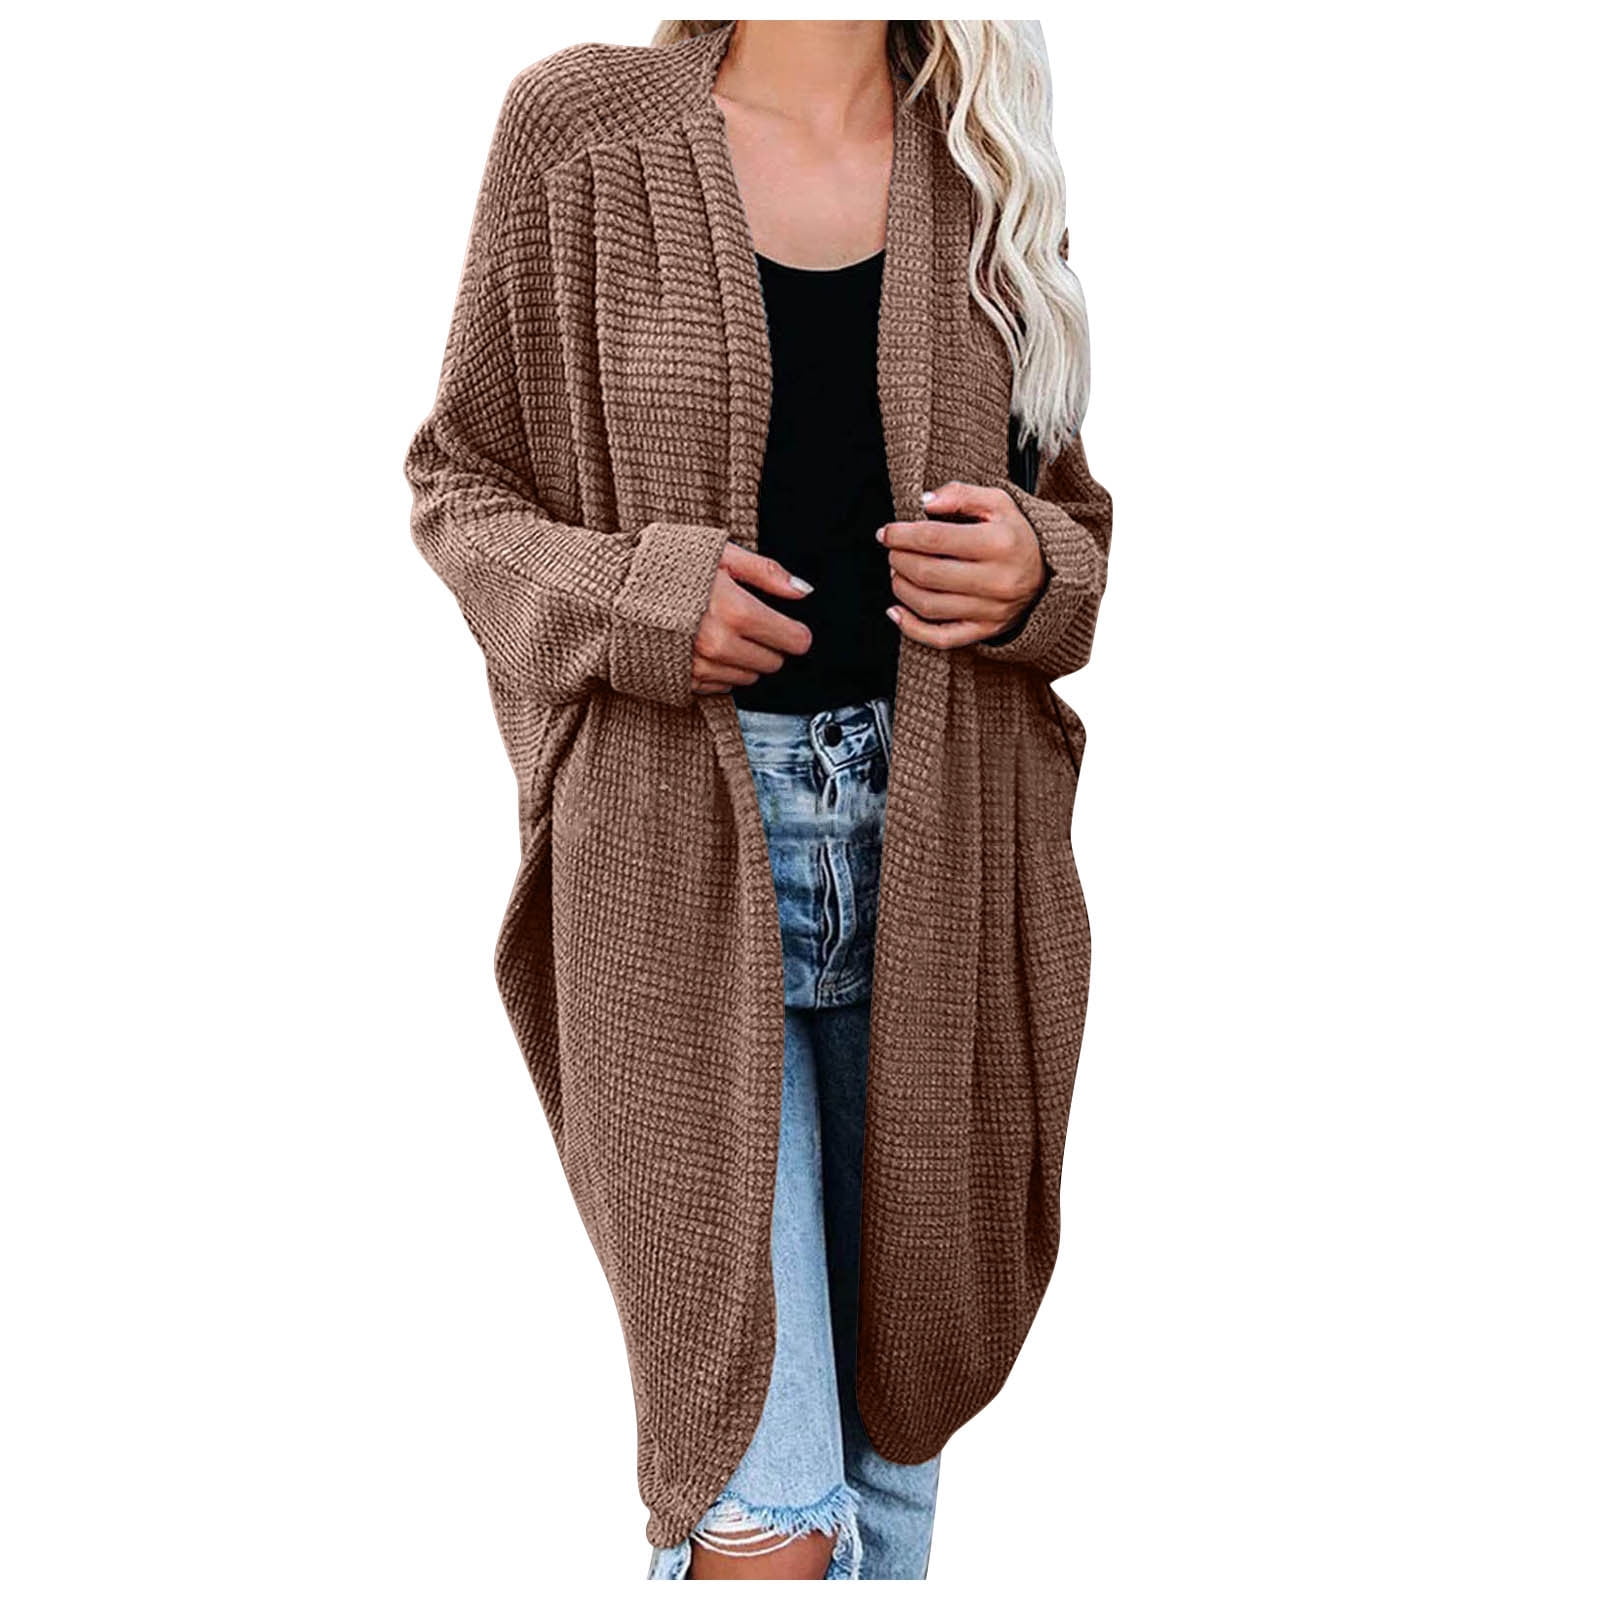 JSGEK Long Shirt Discount Fashion Women Long Sleeve Autumn Knitting Sweater  Solid Color Casual V-Neck Cardigan Loose Blouse Tops